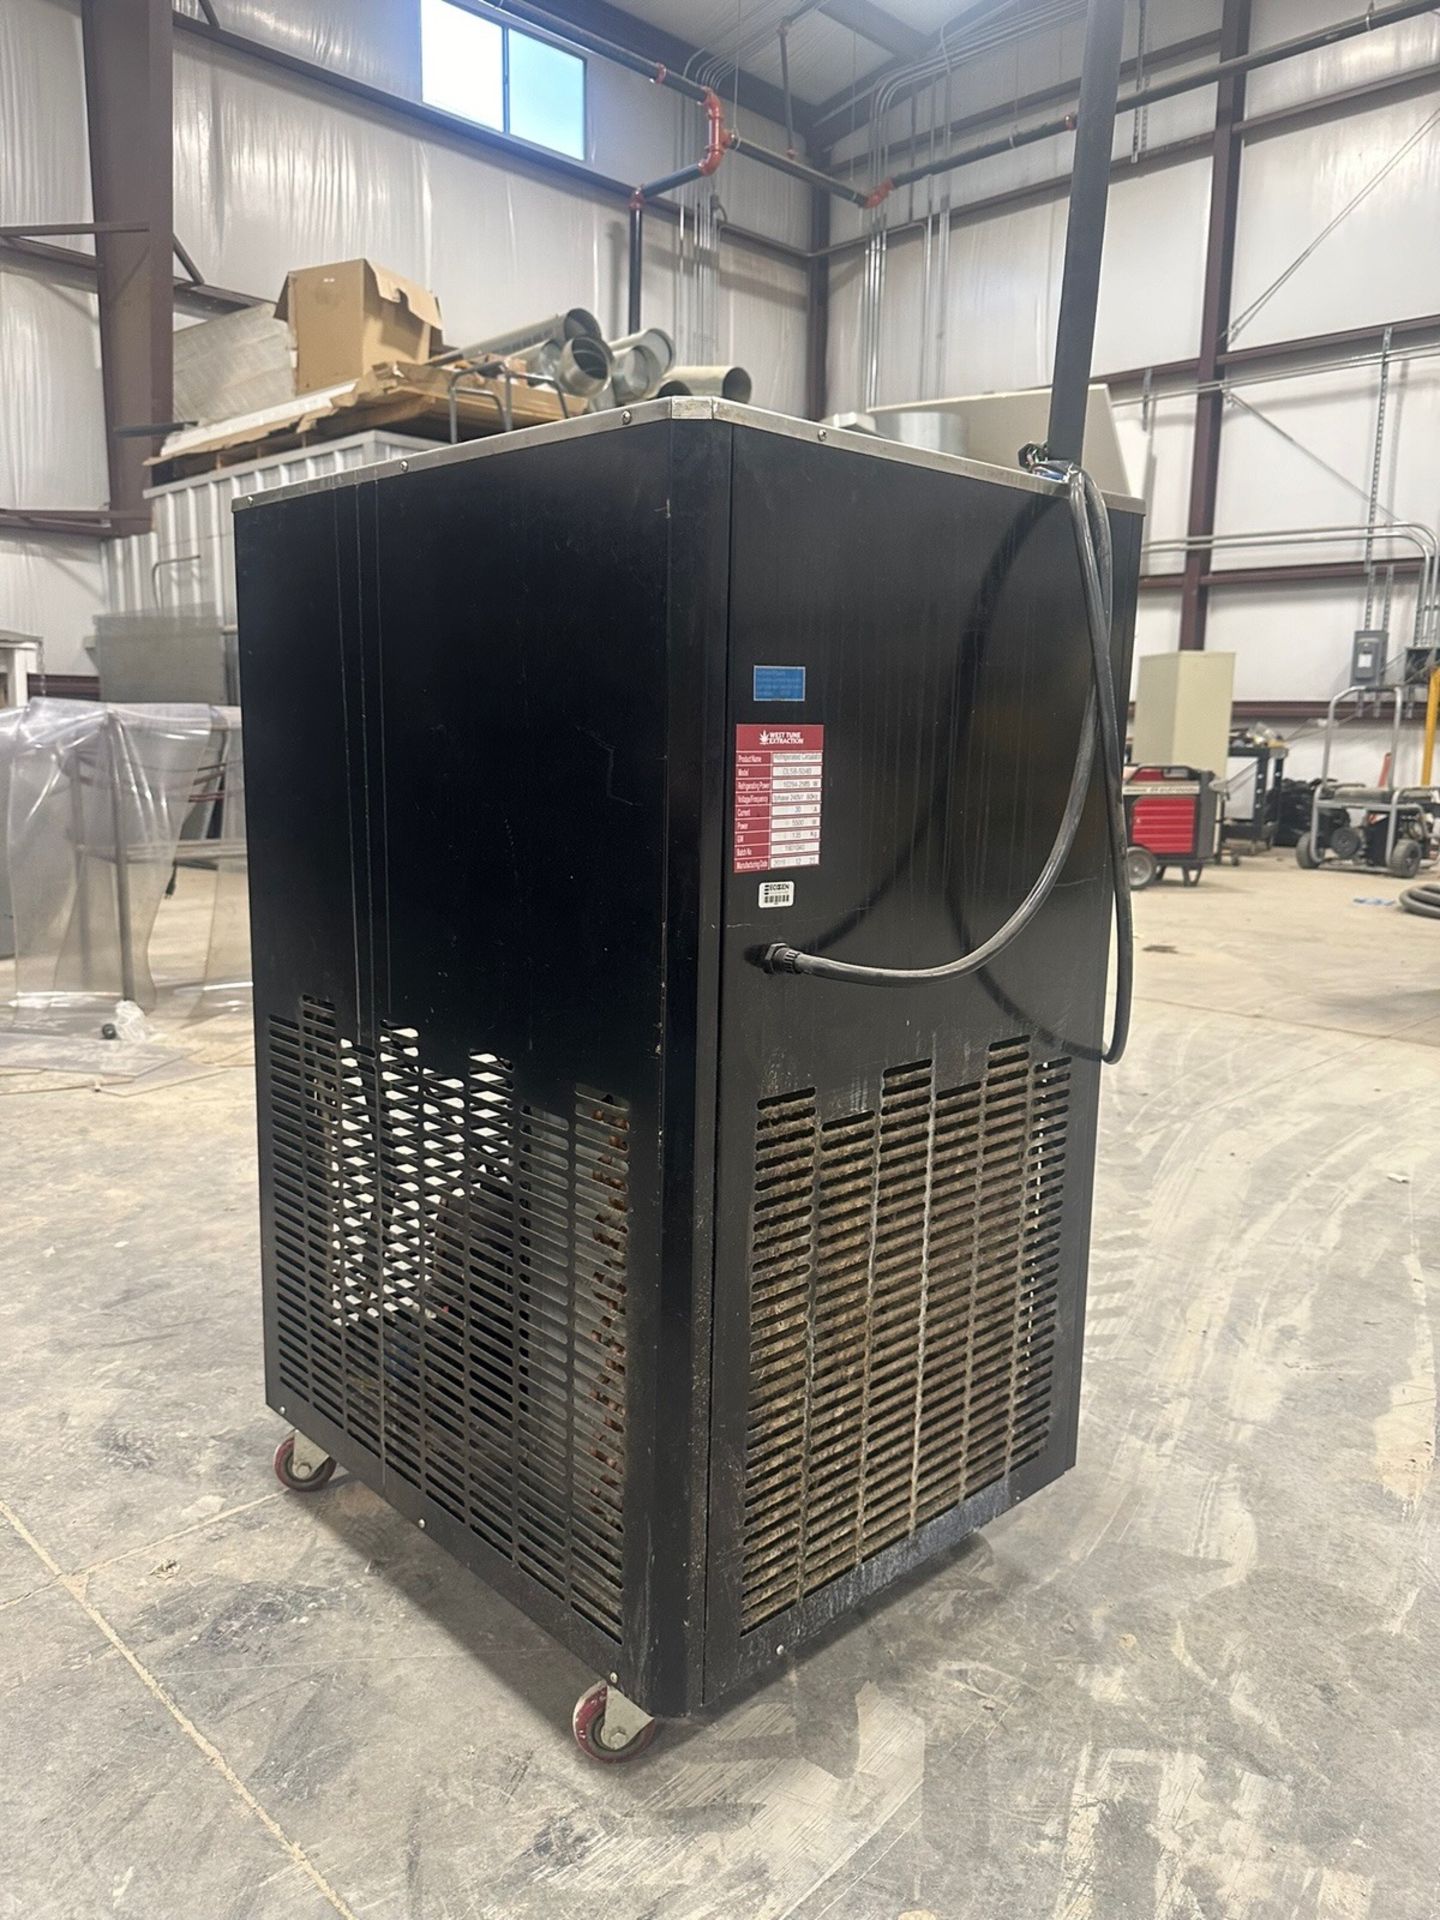 West Tune Extraction Refrigerated Circulator, Model, DLSB-50/40, Year 201 | Rig Fee $125 - Image 2 of 4